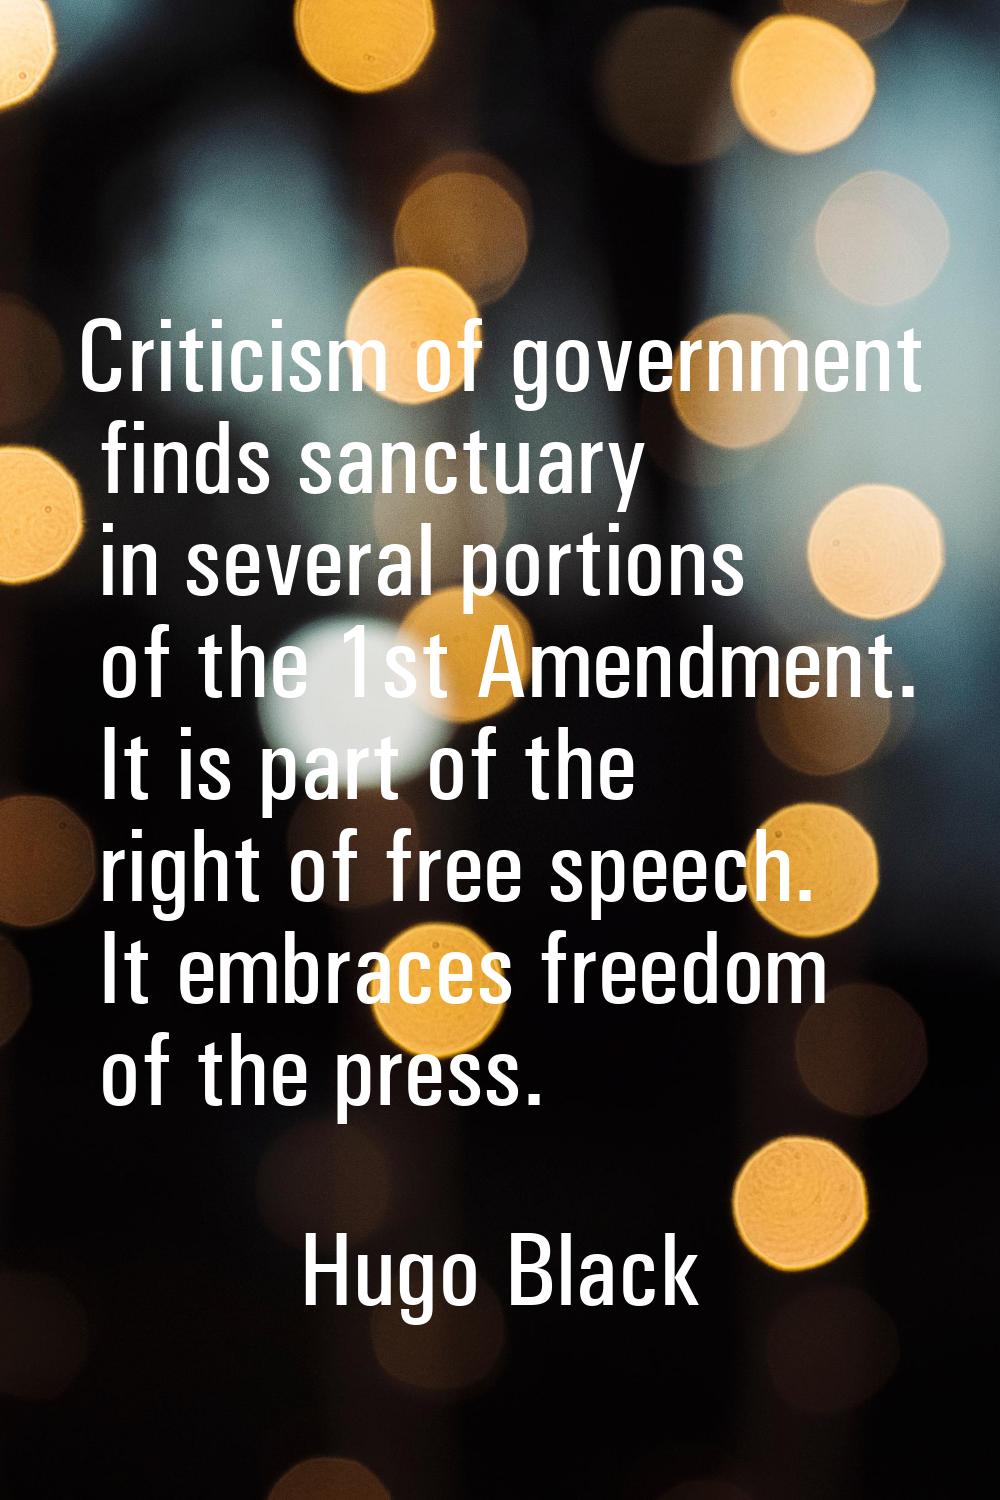 Criticism of government finds sanctuary in several portions of the 1st Amendment. It is part of the